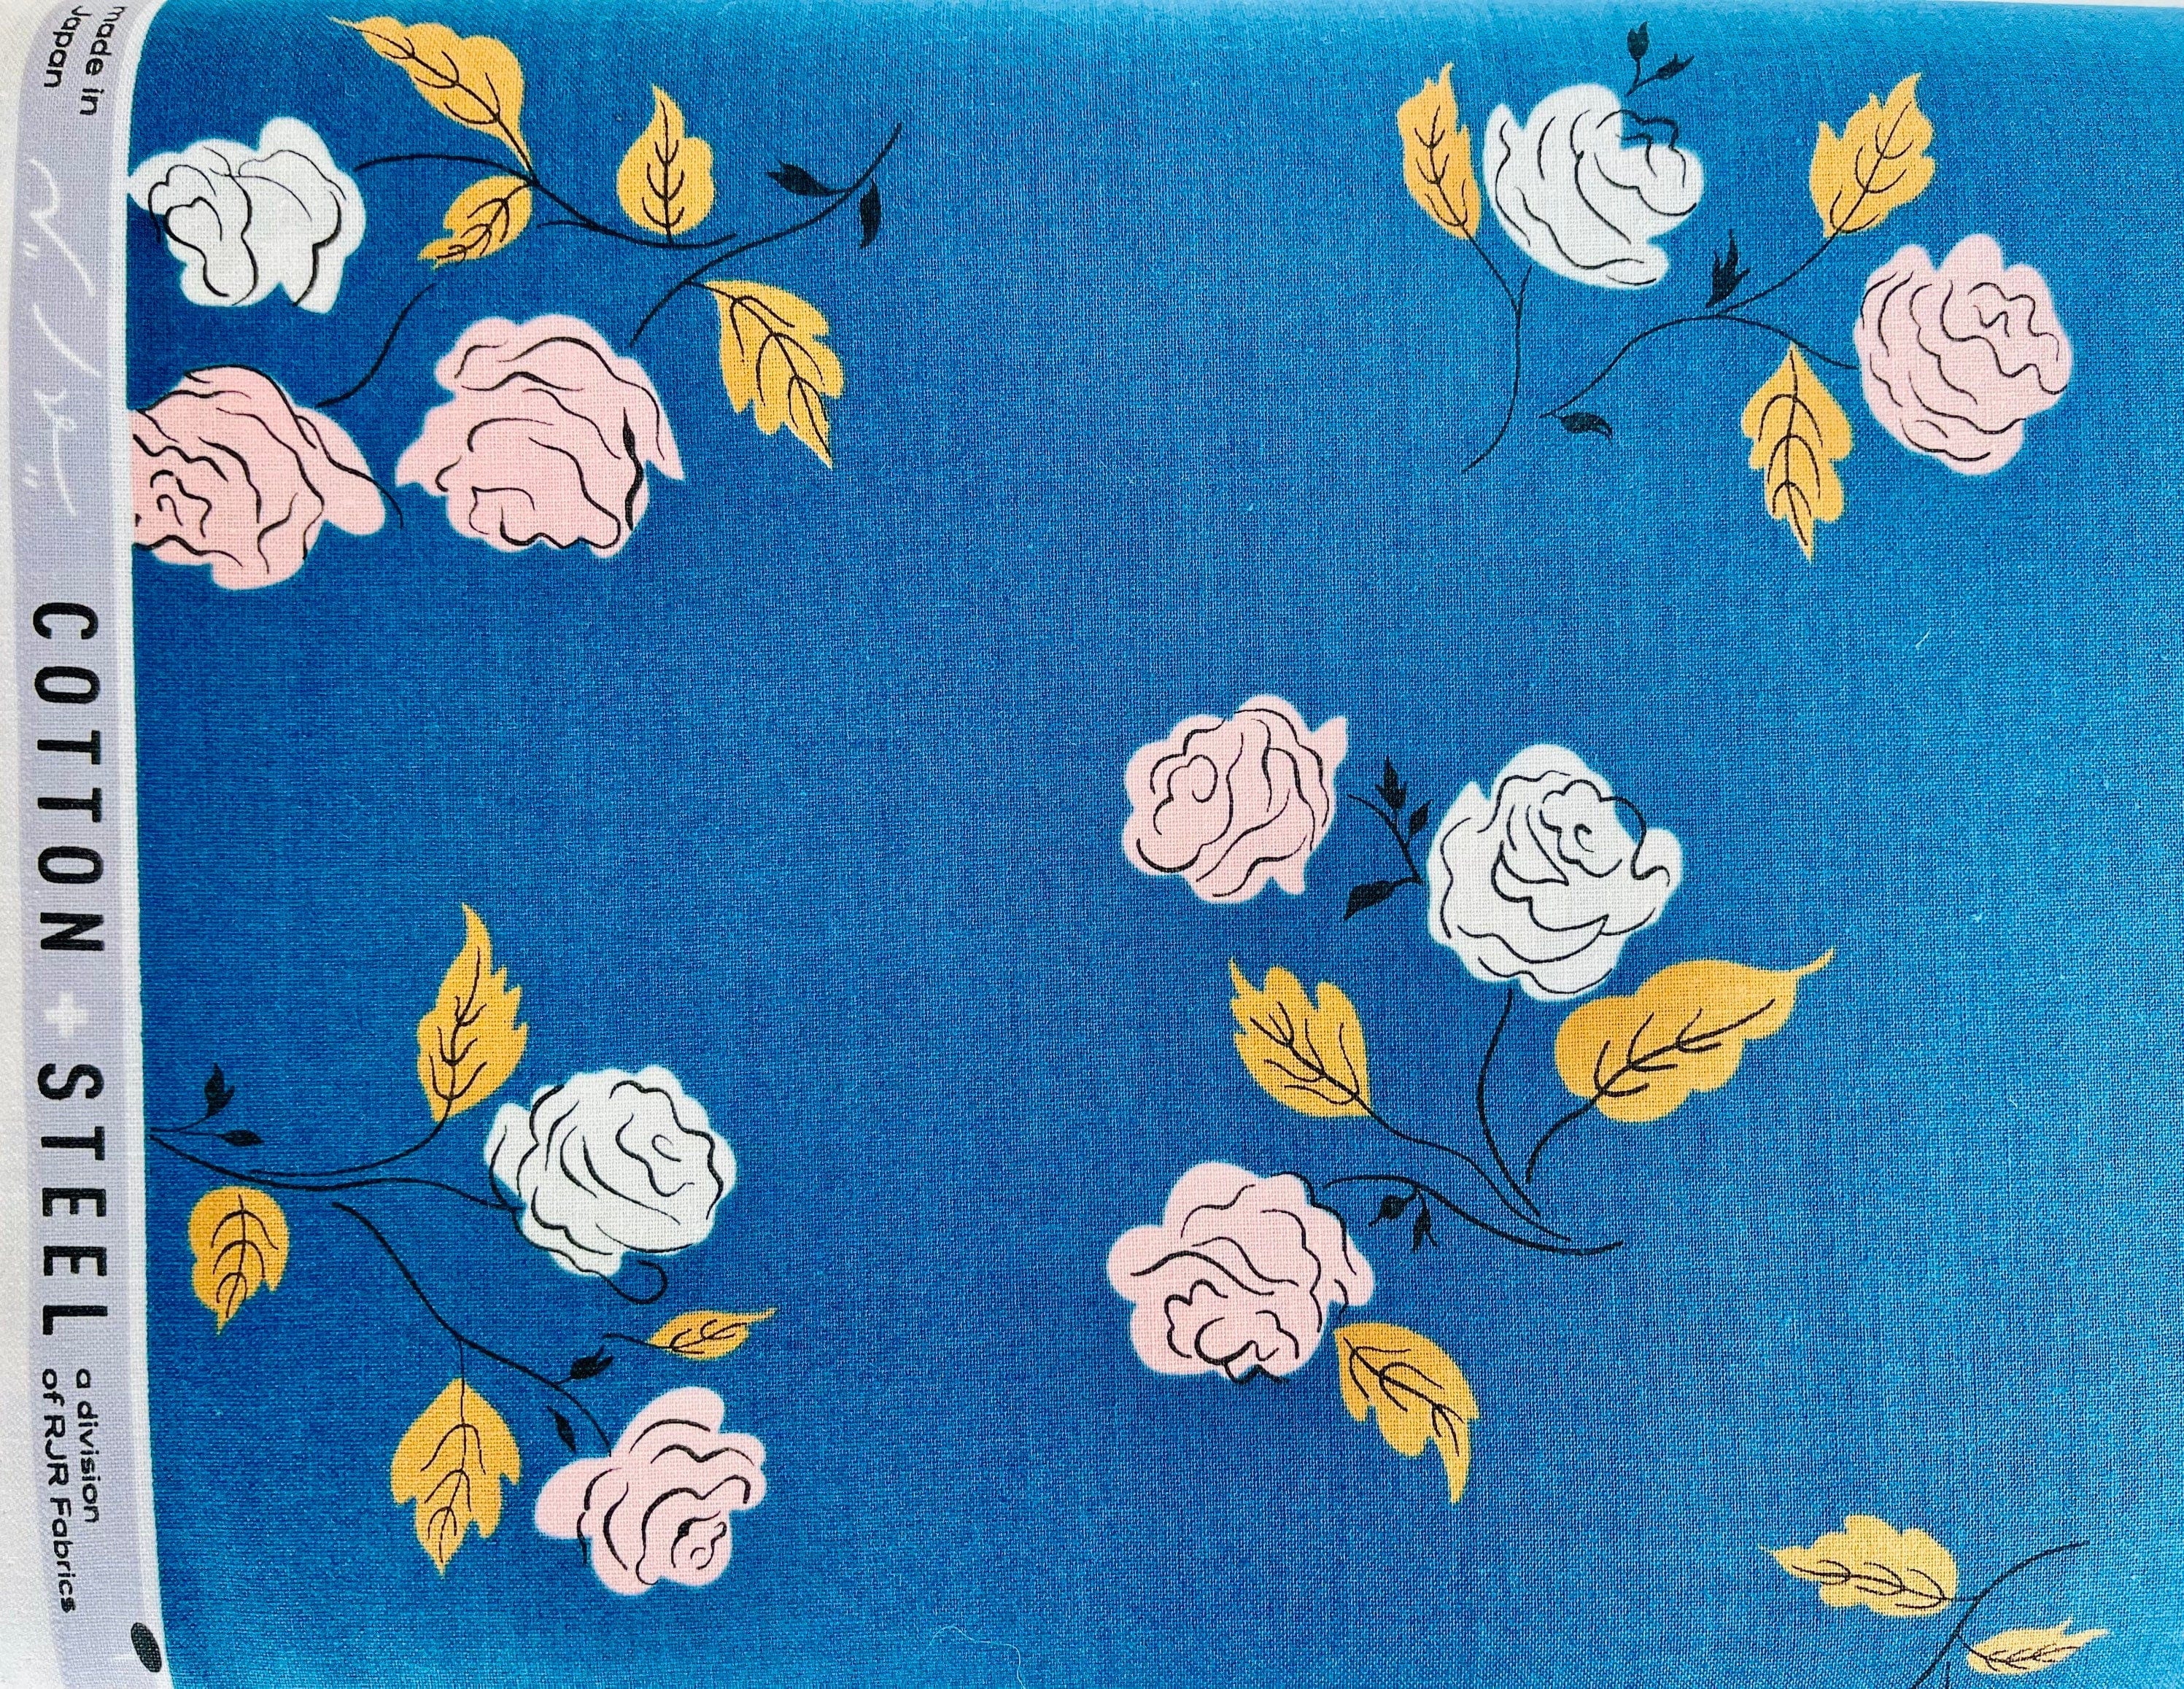 Steno Pool - Roses Midnight - Kimberly Kight - Cotton + Steel Fabric - Blue - Pink - Brown - Quilting Cotton - K3065-001